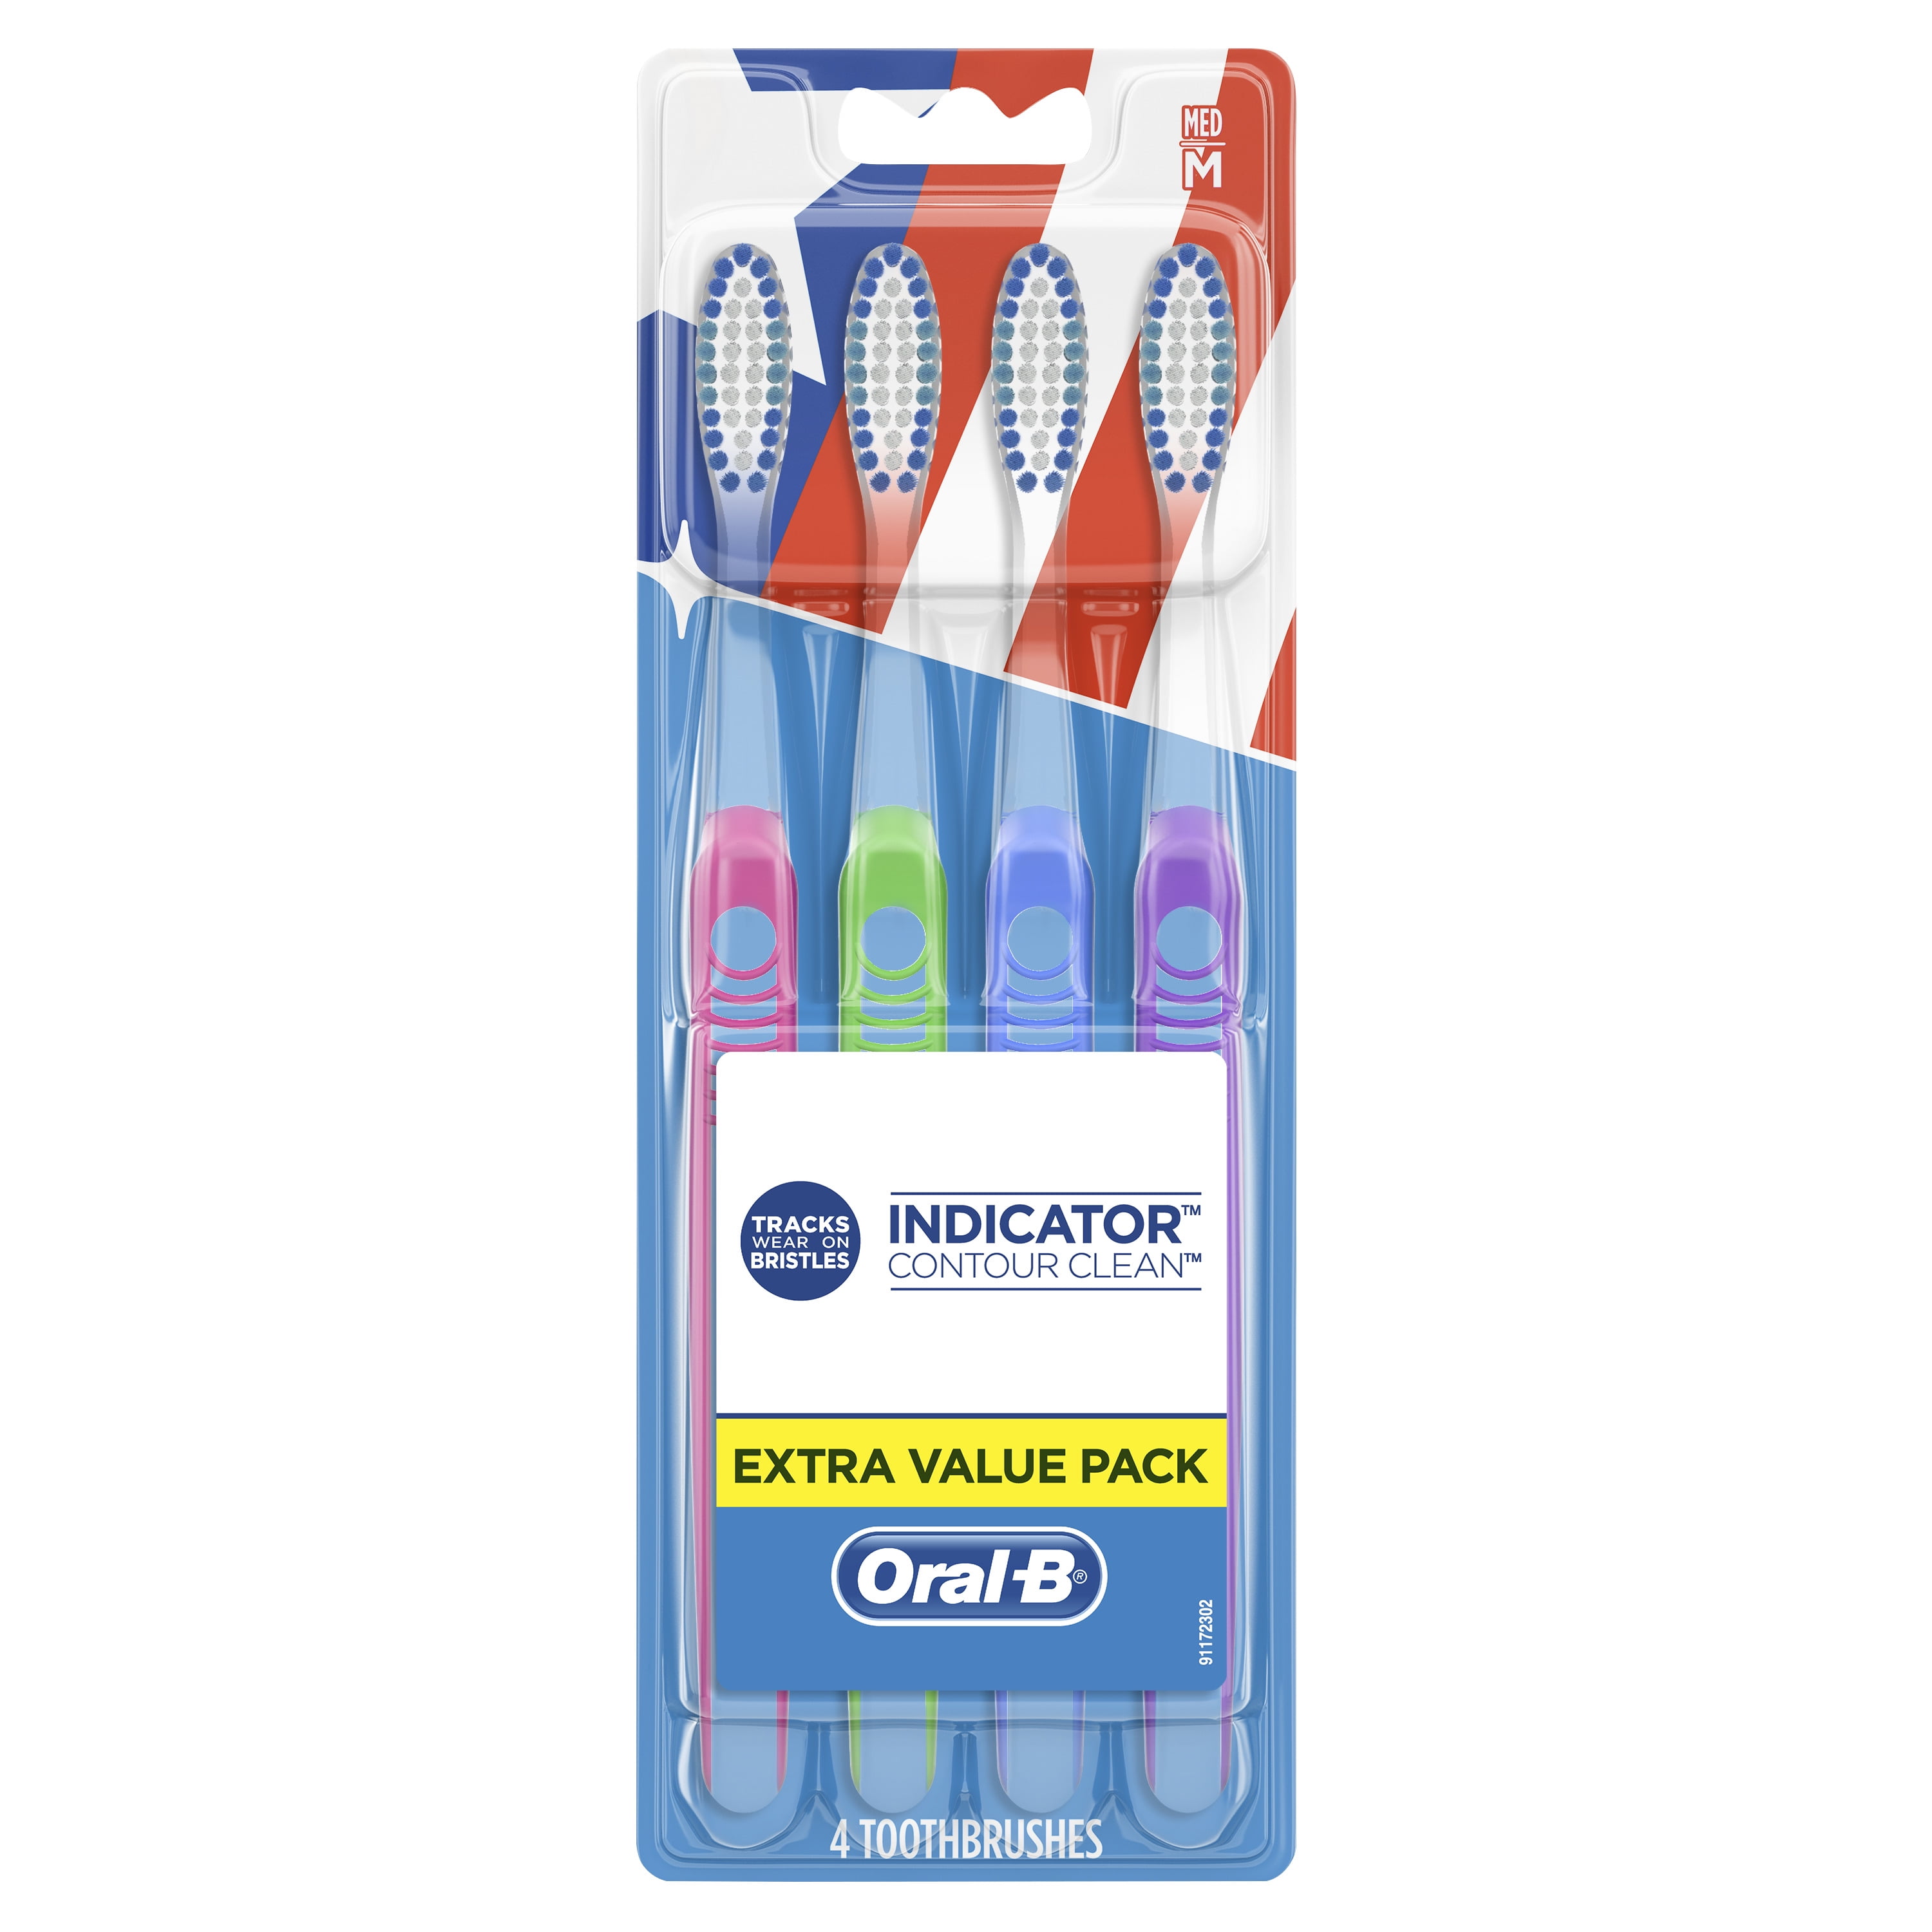 Oral B Indicator Toothbrushes, Medium, Extra Value Pack - 4 toothbrushes